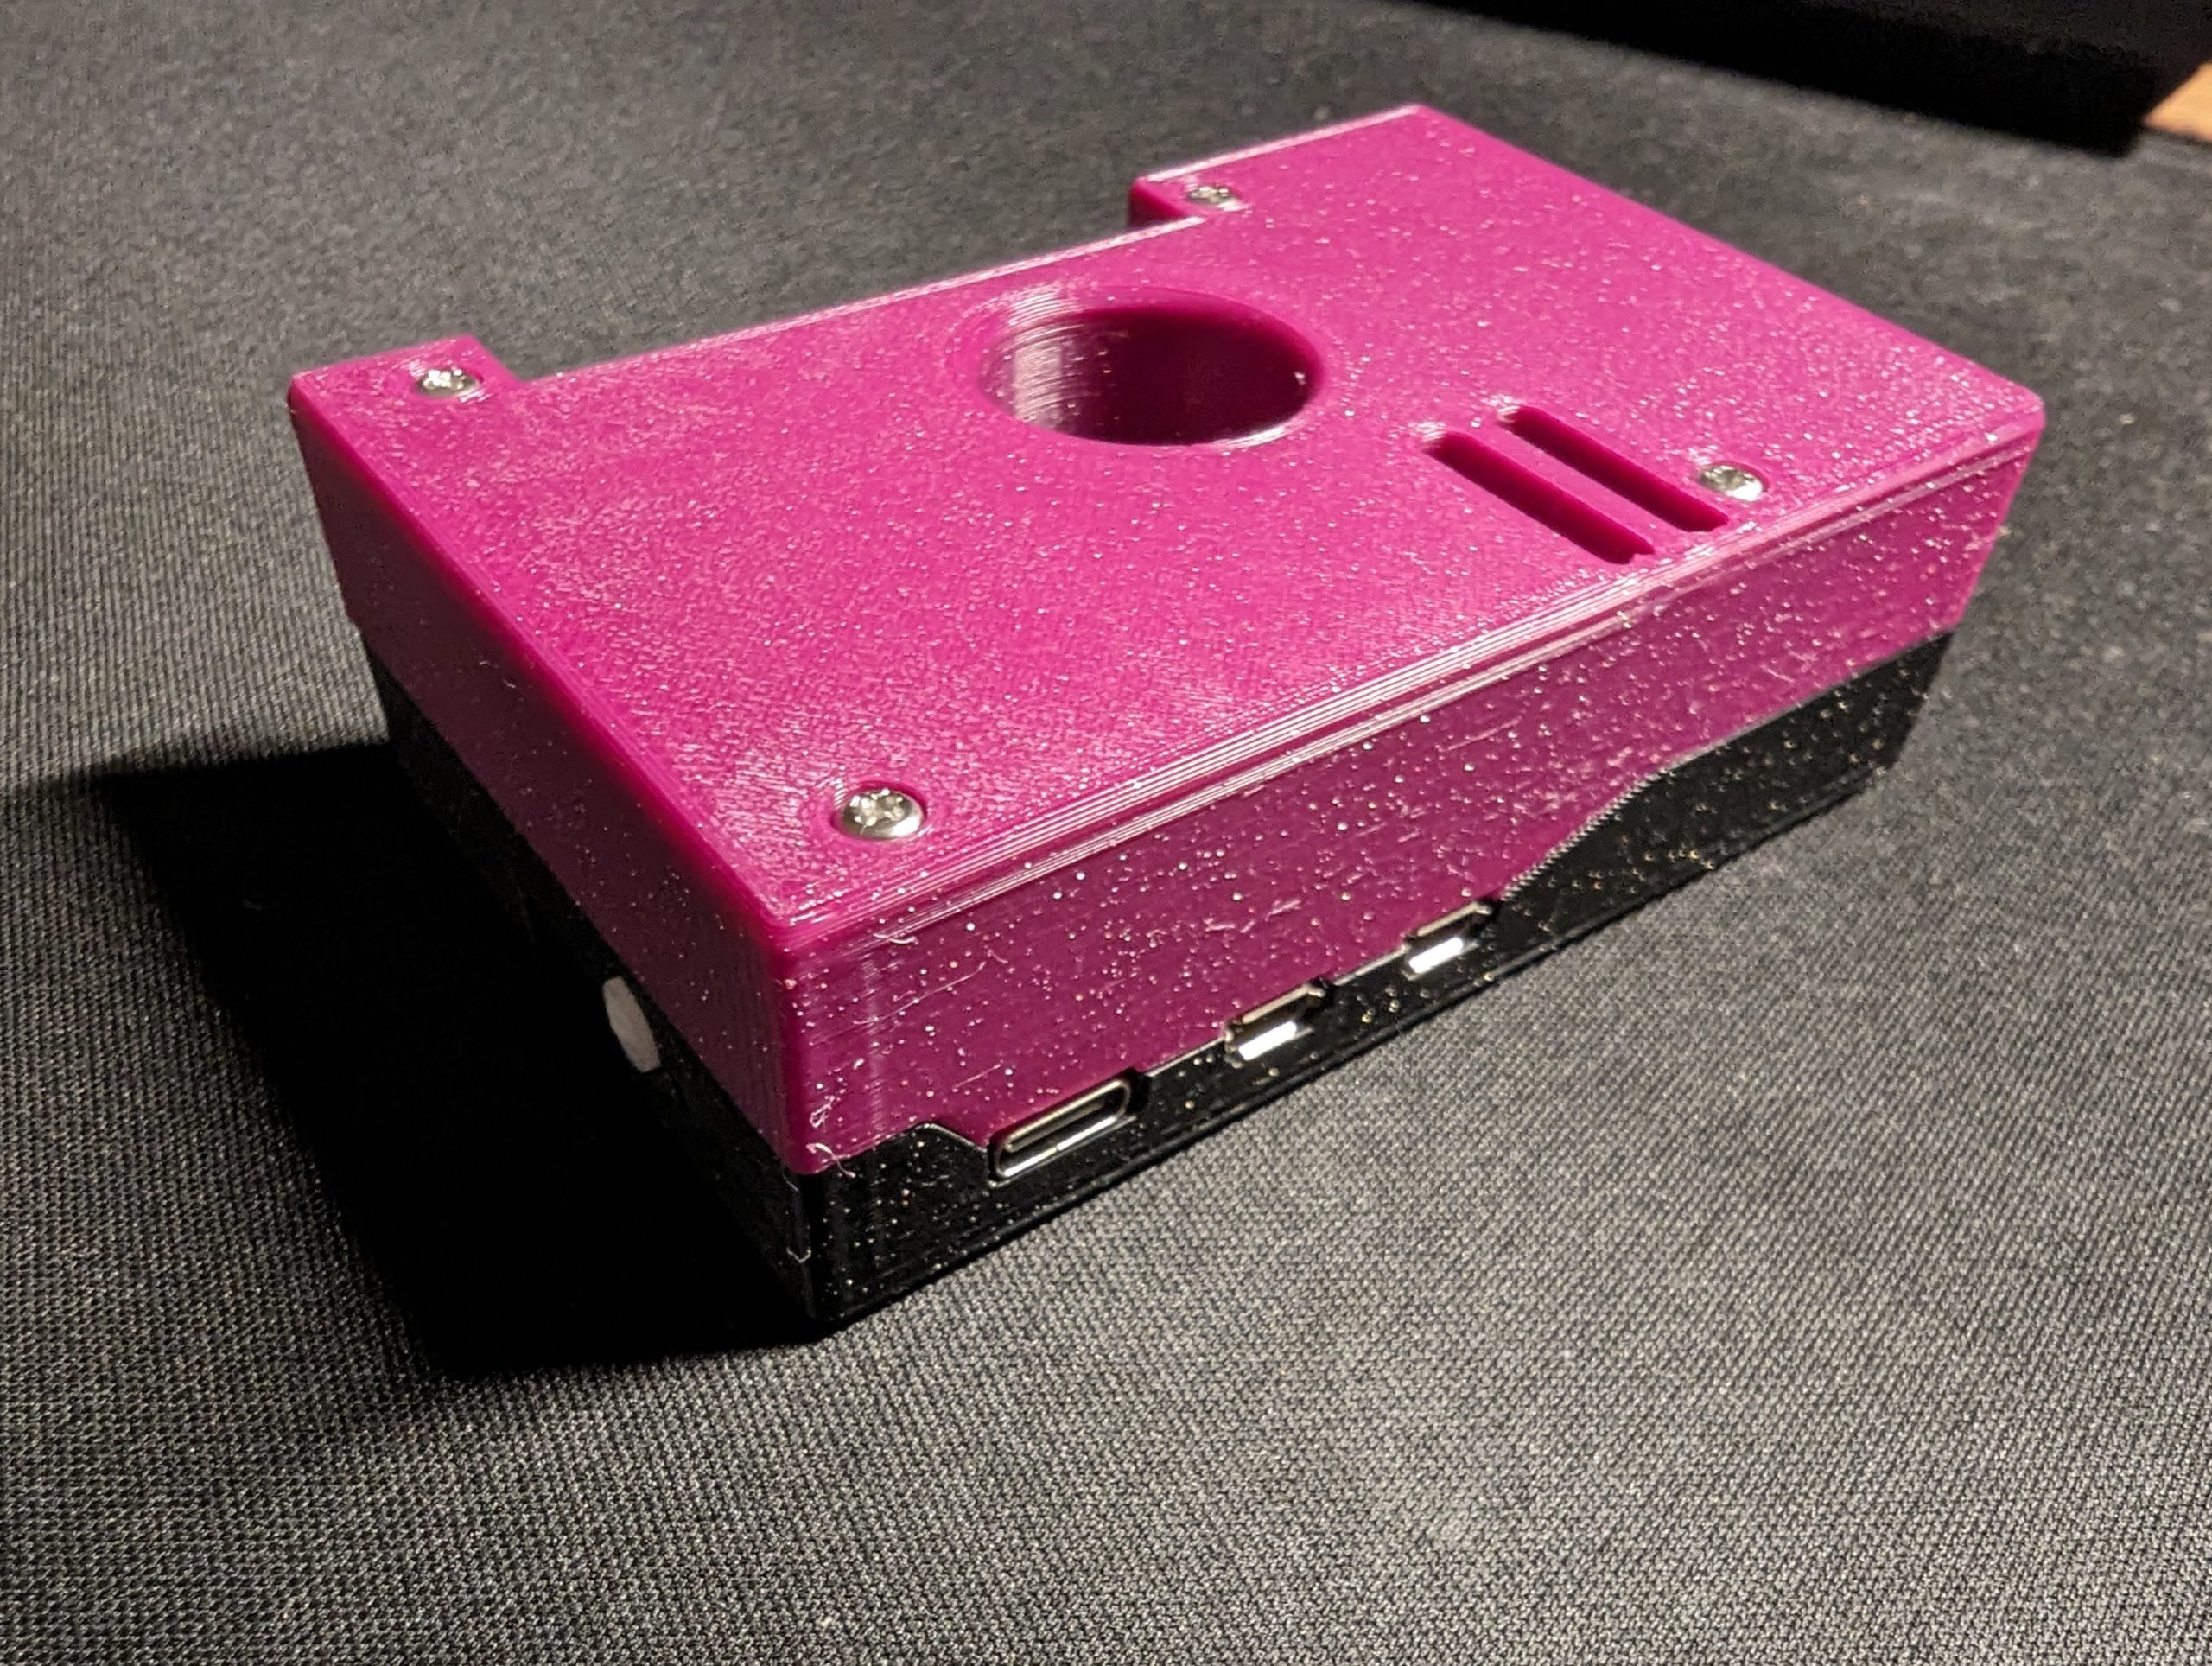 The assembled Raspberry Pi 5 case, with the top part printed in purple and the bottom part black.